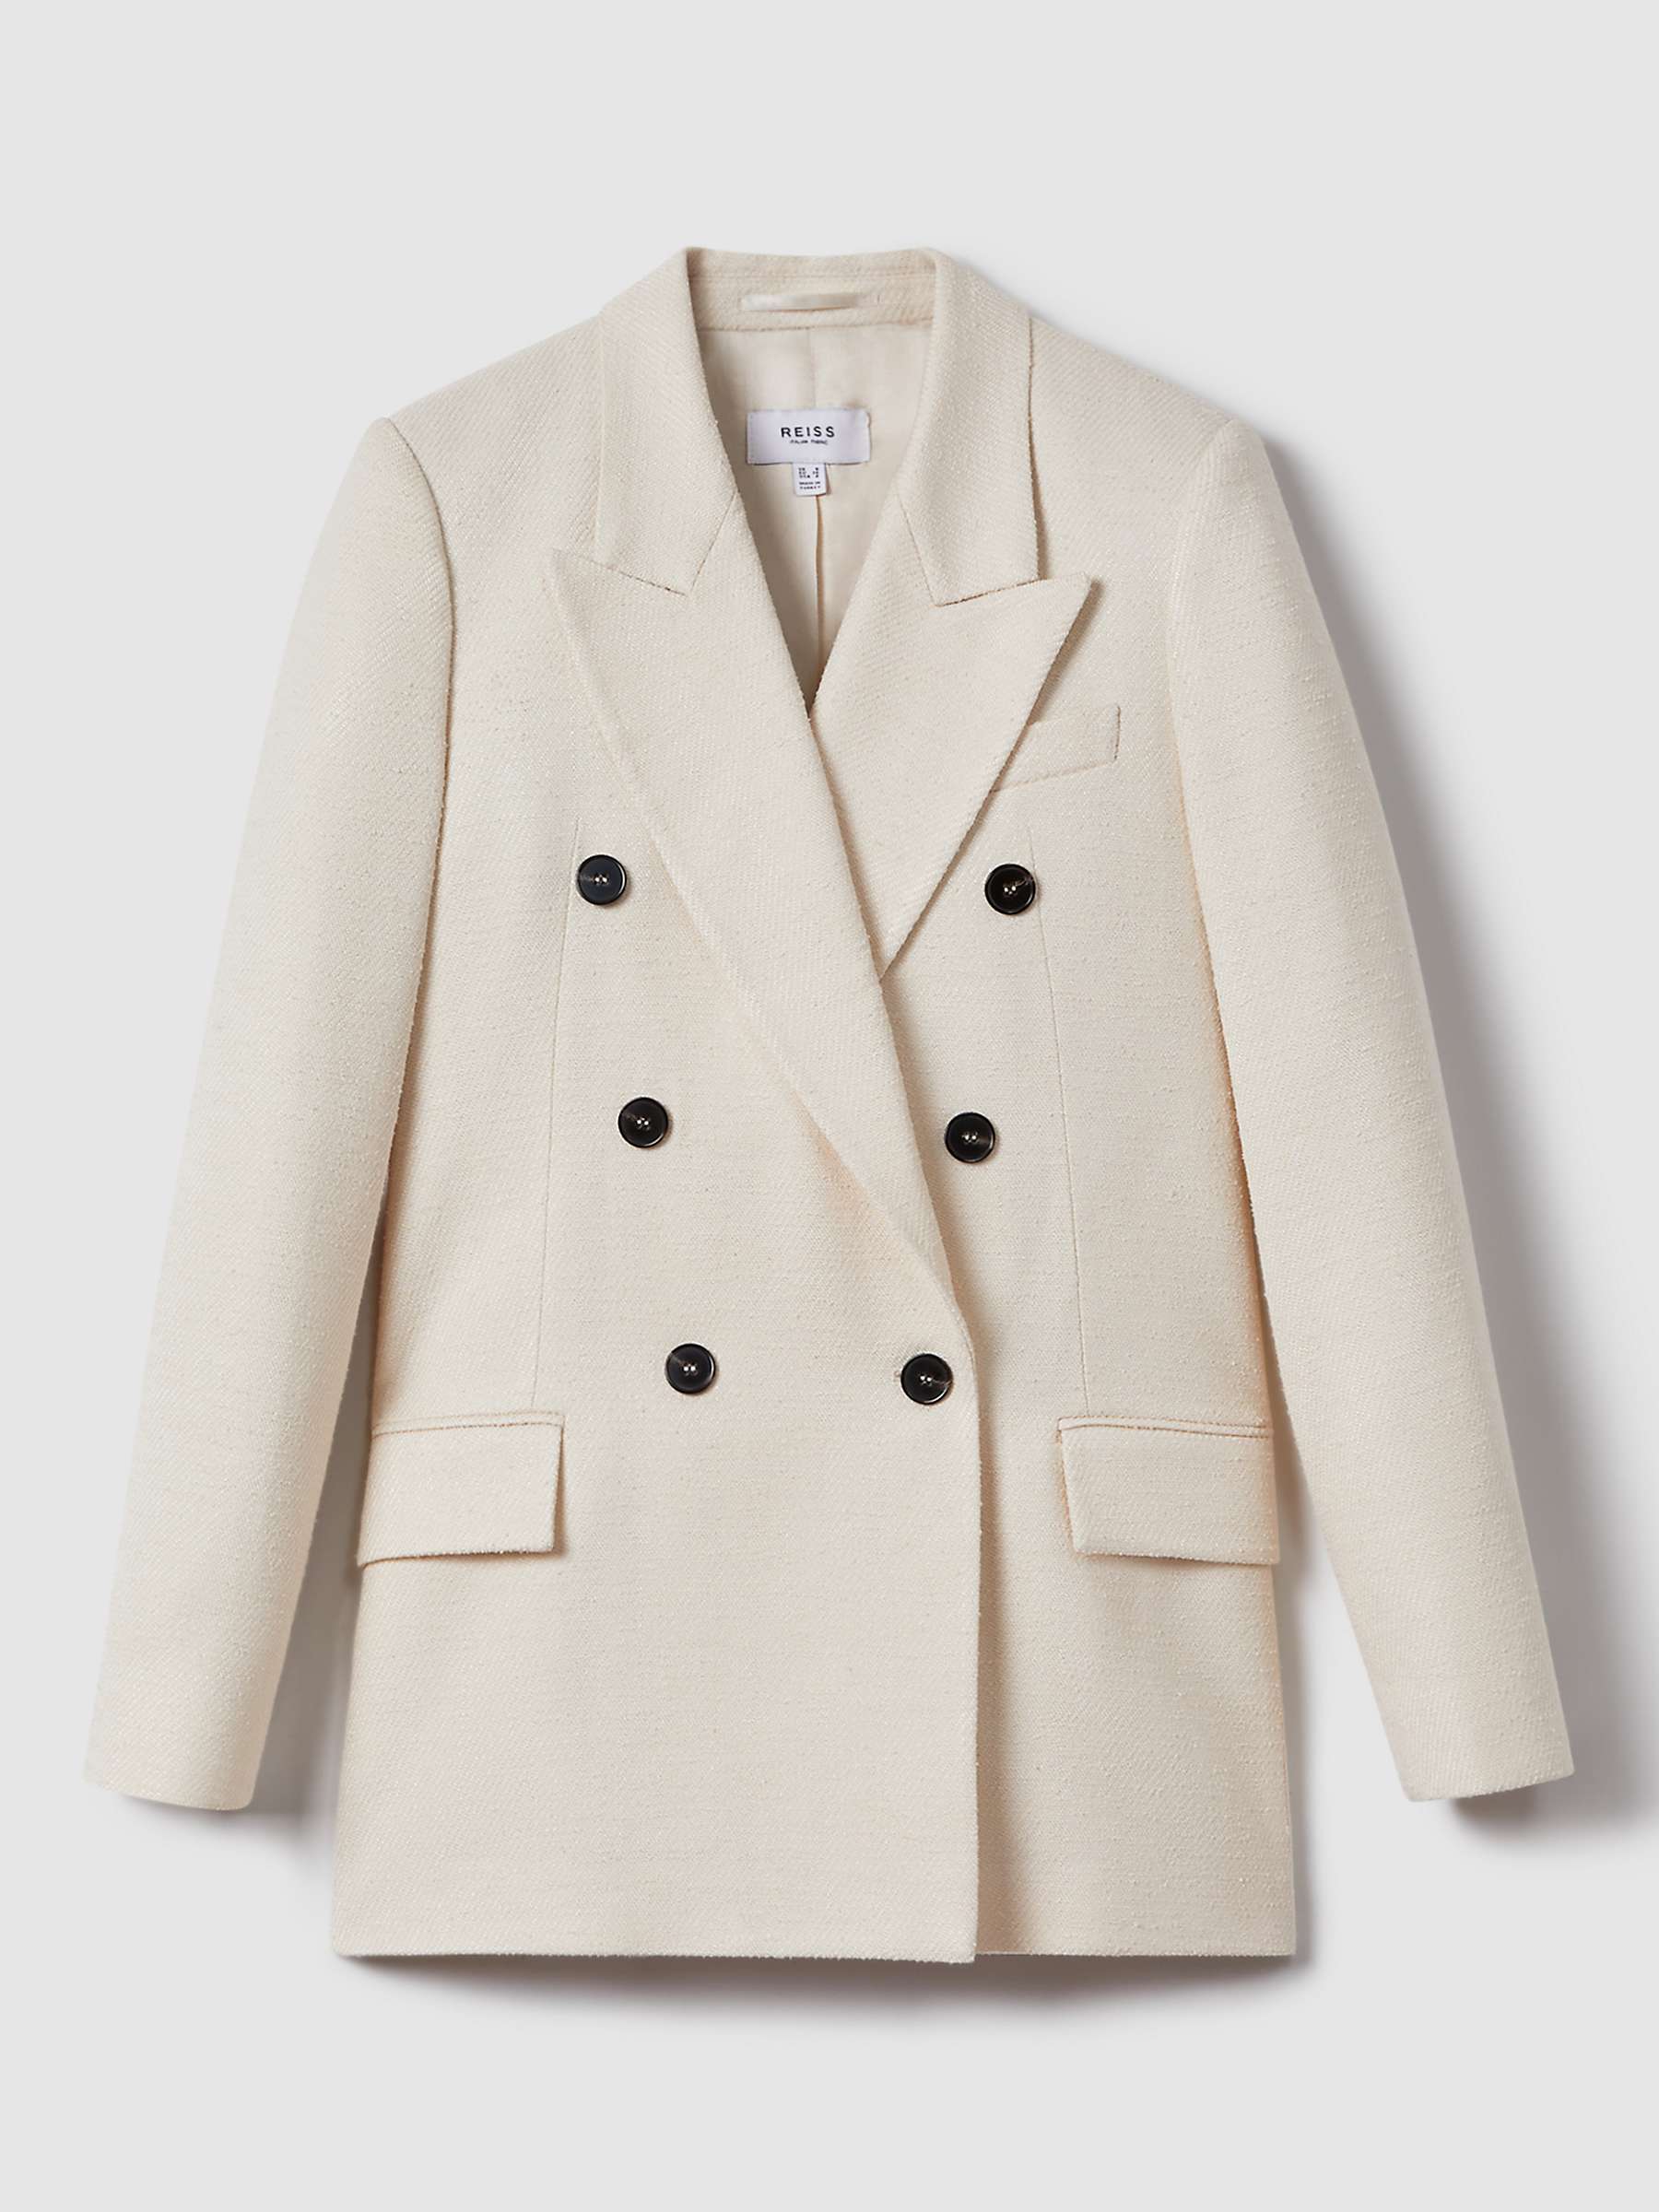 Buy Reiss Bronte Double Breasted Blazer, White Online at johnlewis.com